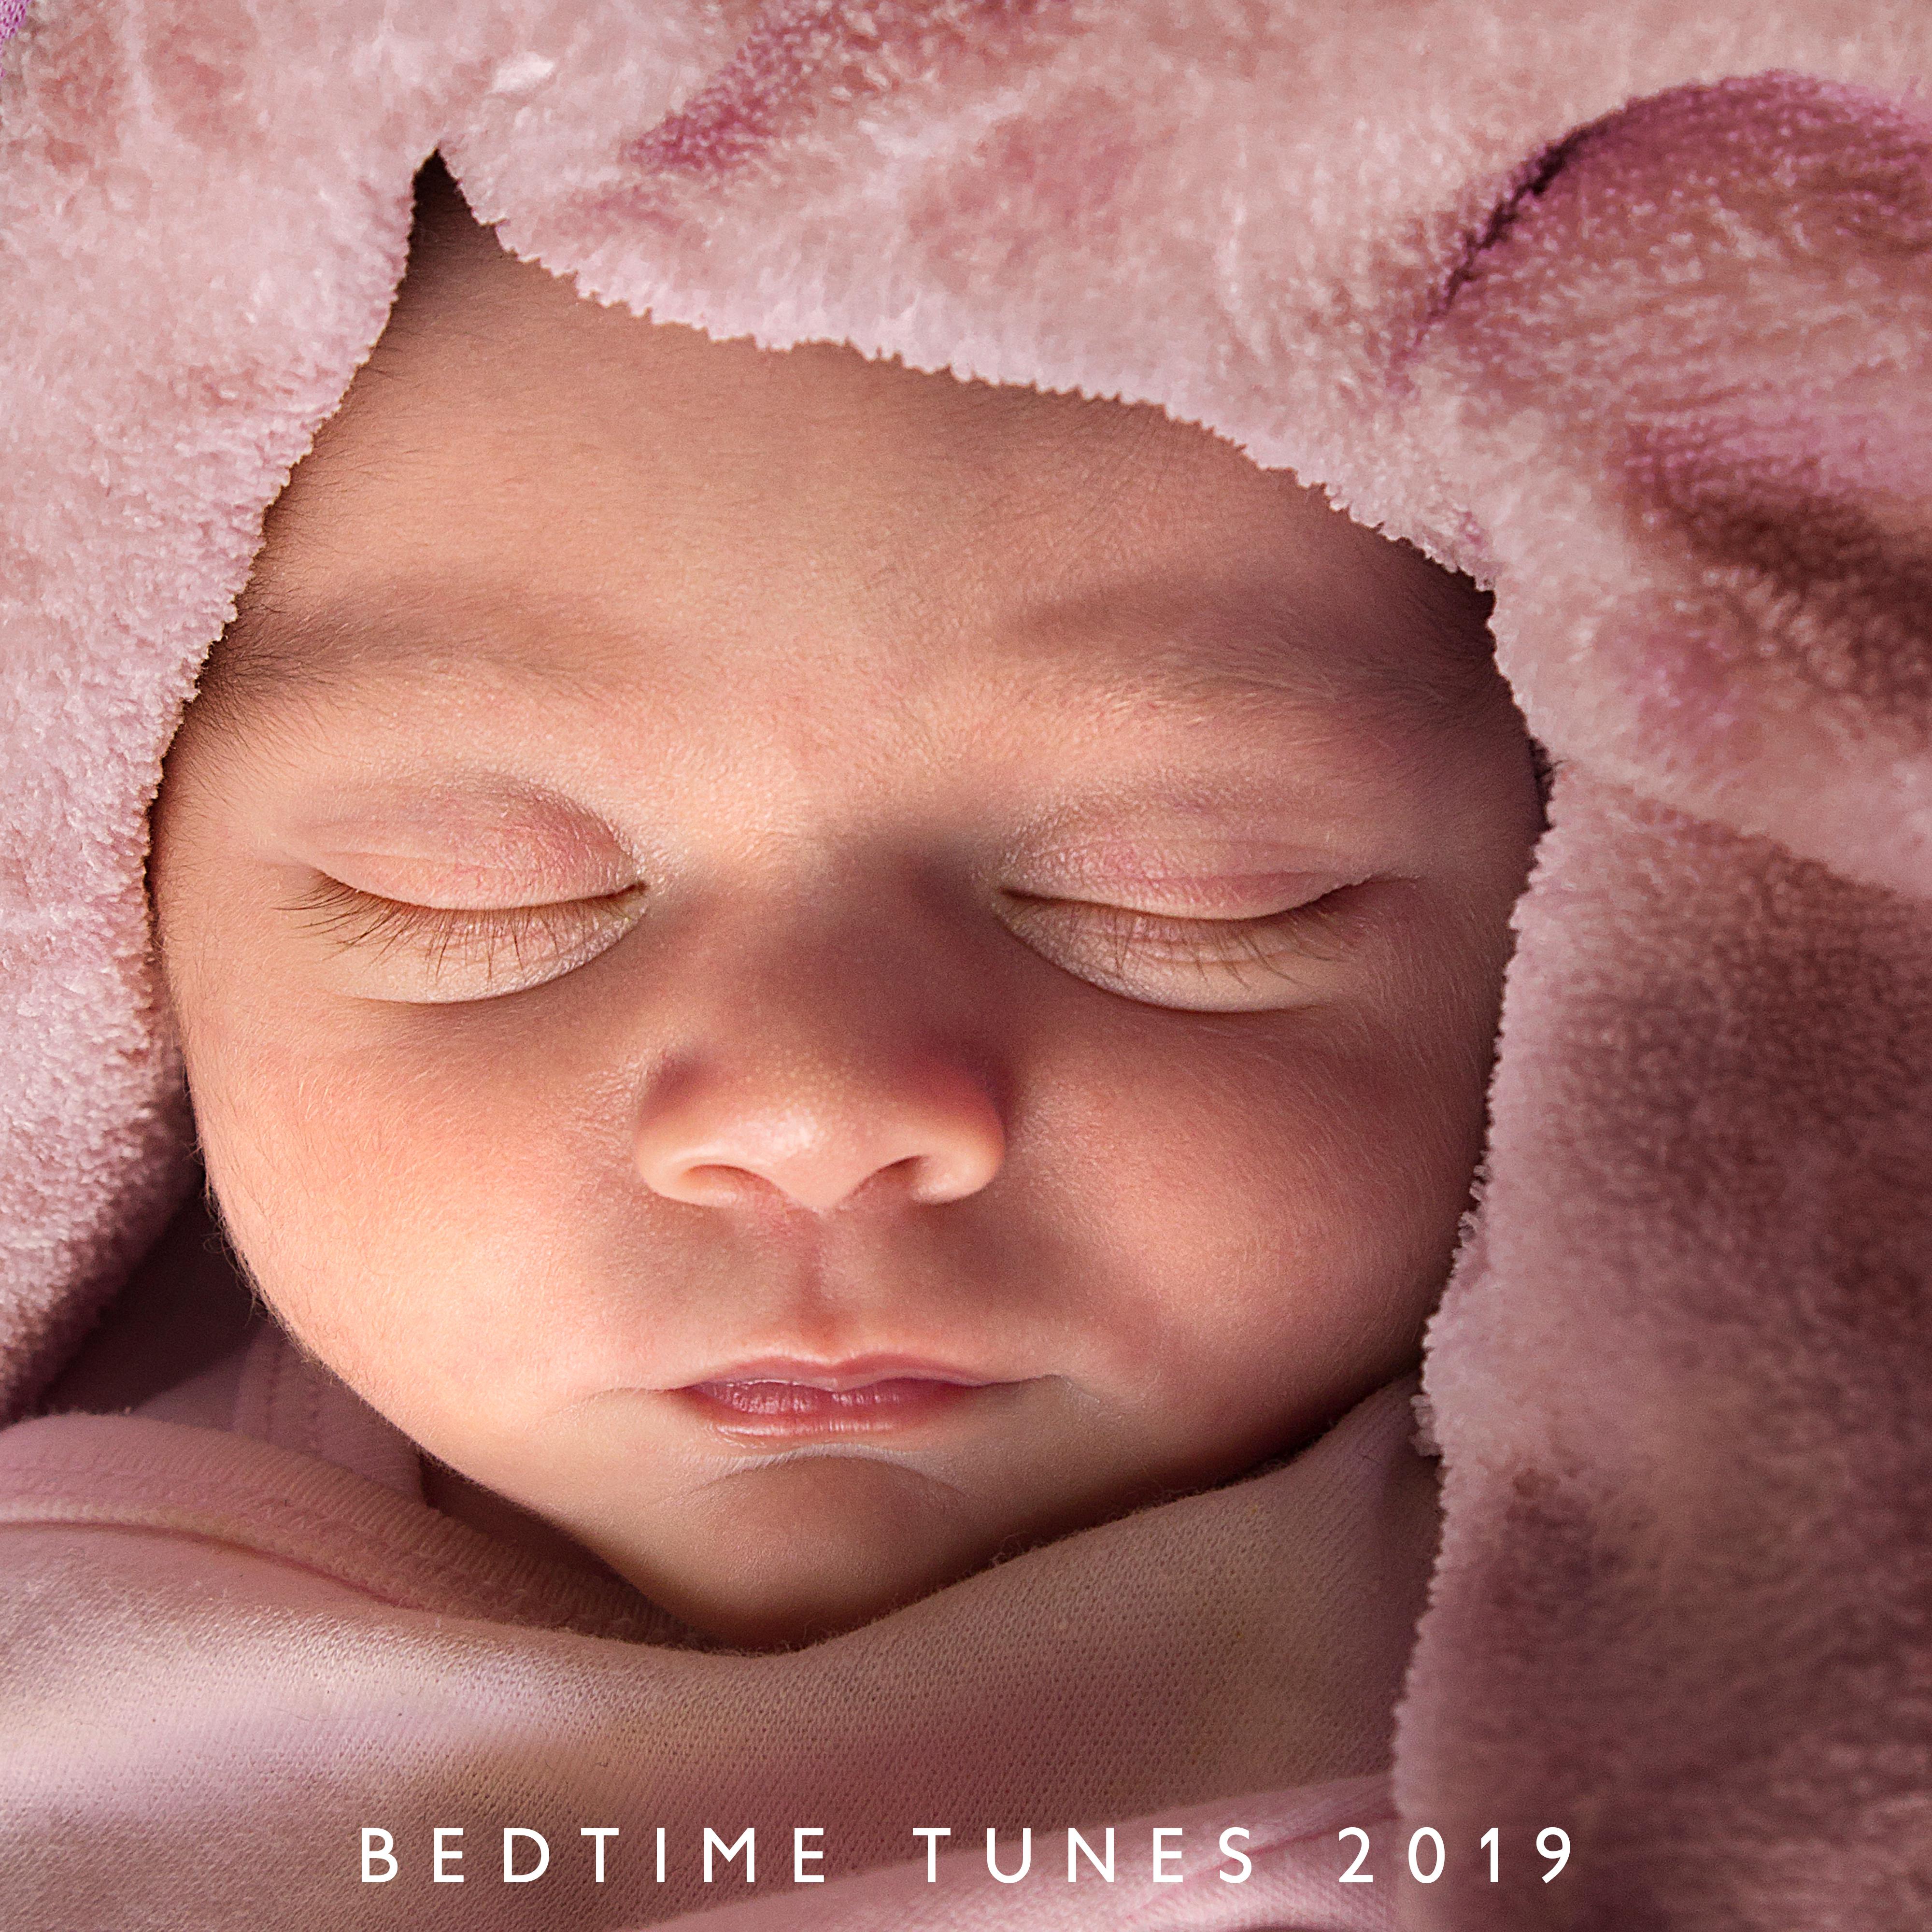 Bedtime Tunes 2019 – Soothing Lullabies for Baby, Calming Melodies, Deeper Sleep, Nap Time, Music for Baby at Night